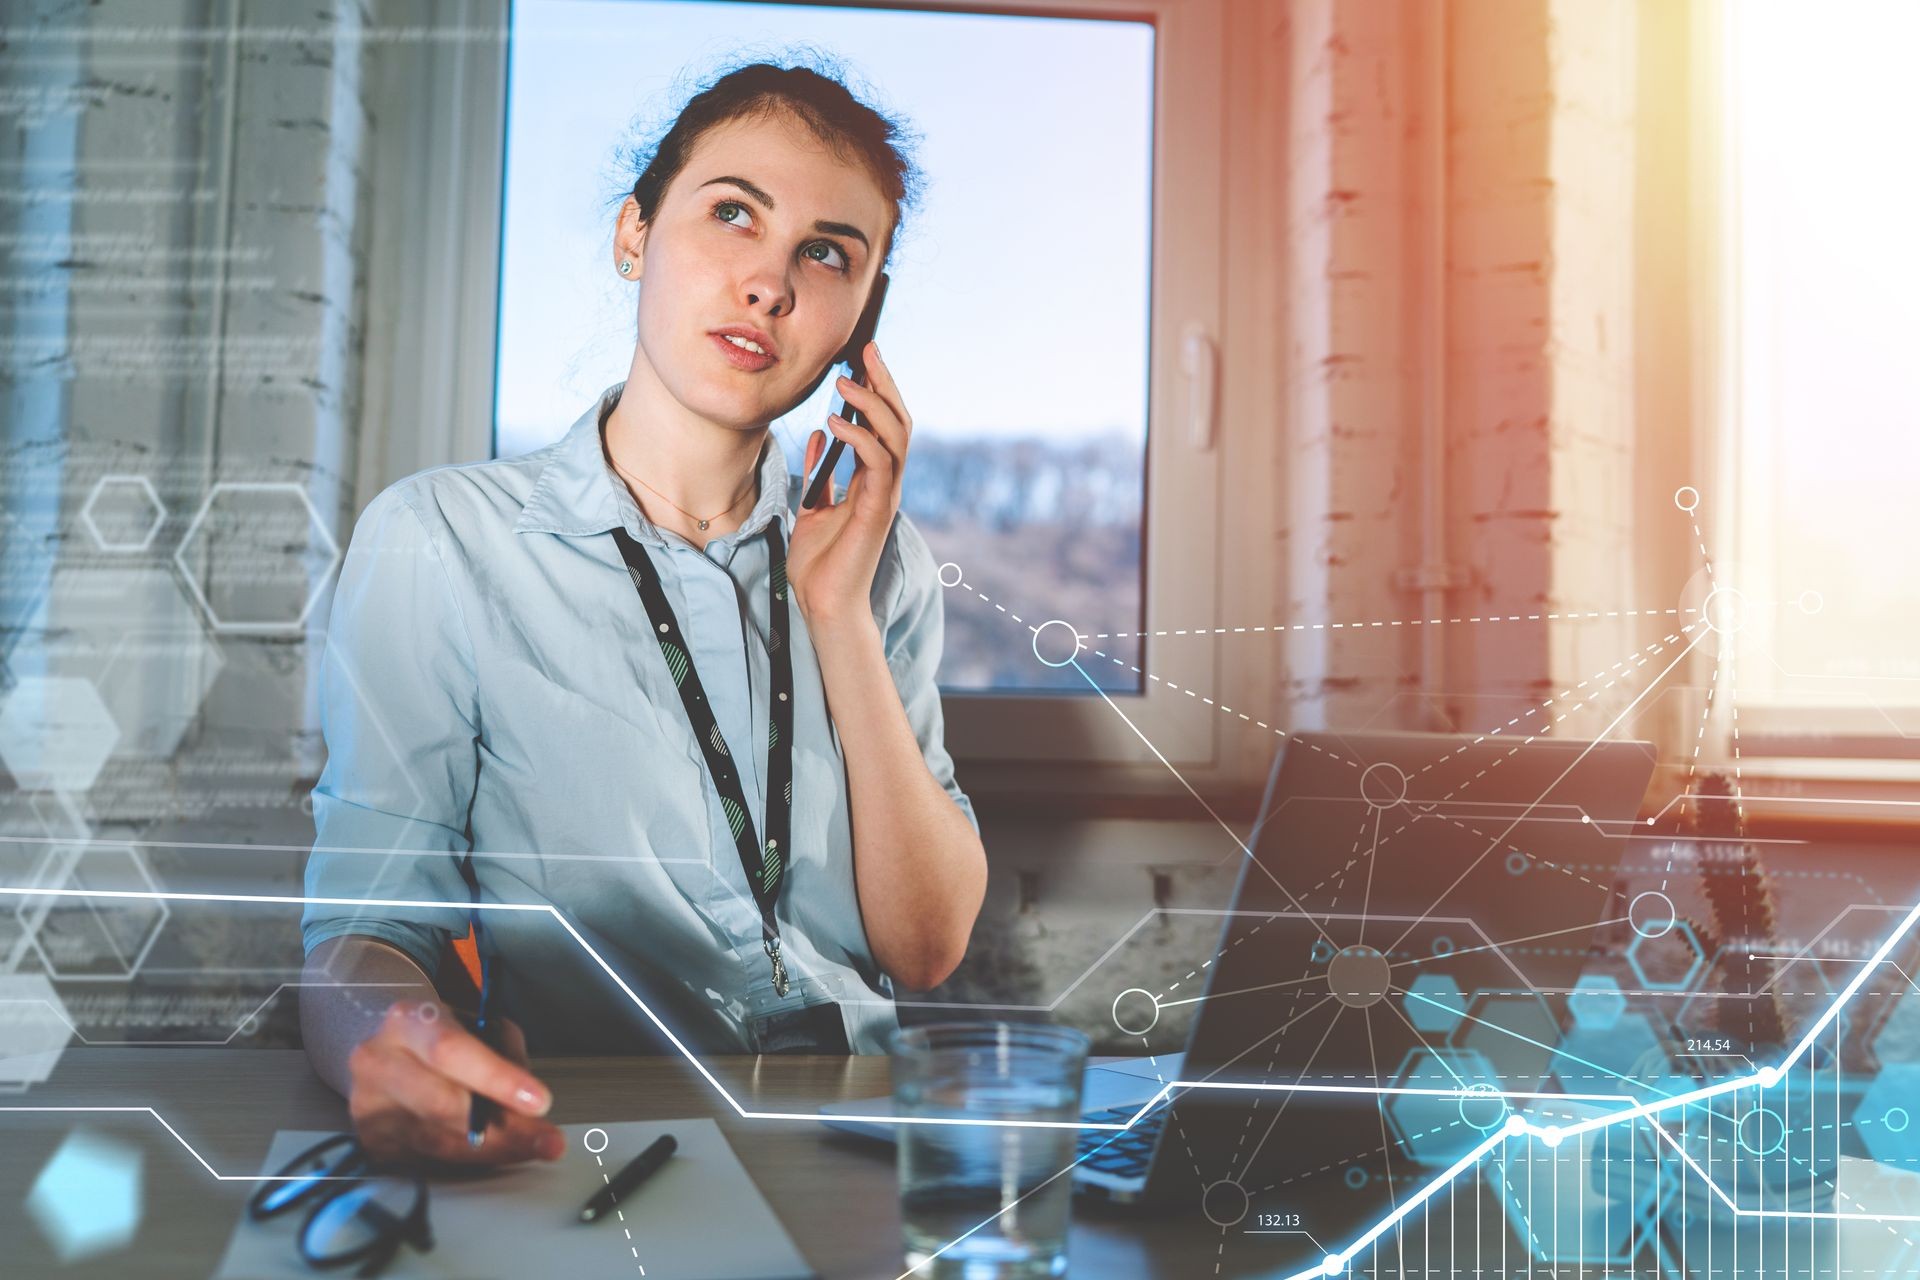 Young attractive casually dressed female entrepreneur answering a call in the office on her mobile phone. Work in process. Virtual futuristic background with various applications icons.